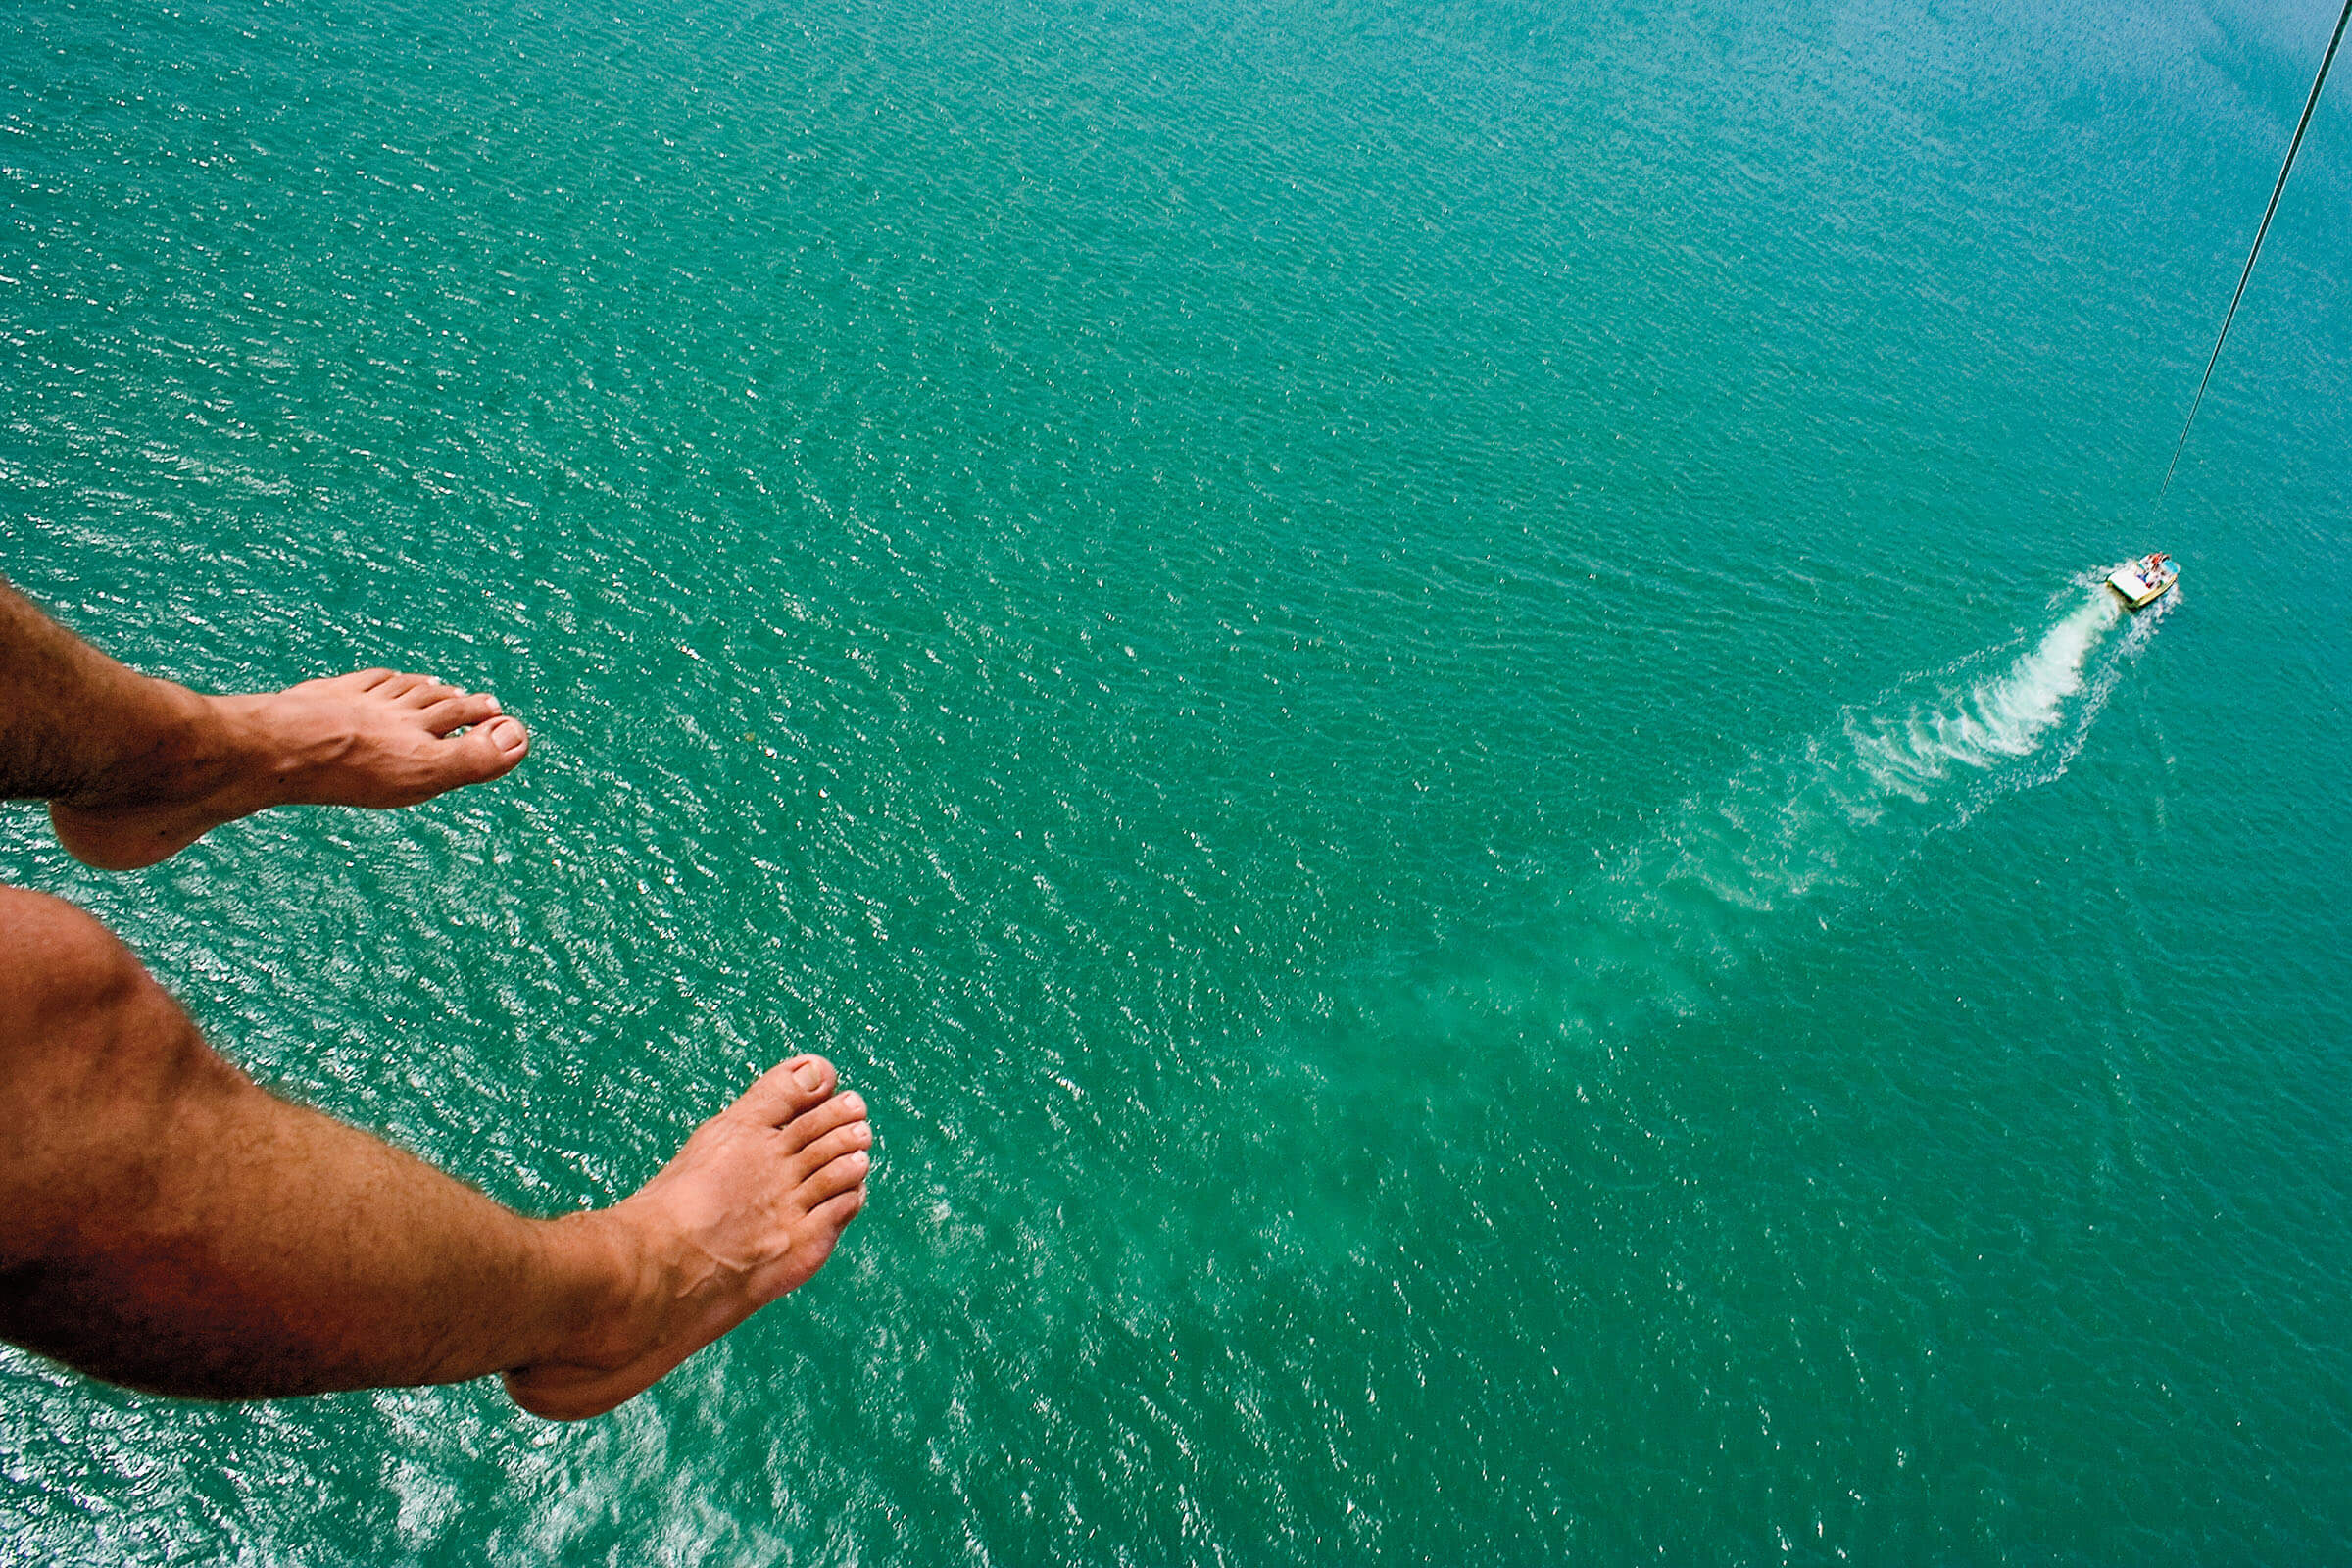 Two feet dangle over bright blue-green water with a boat in the distance